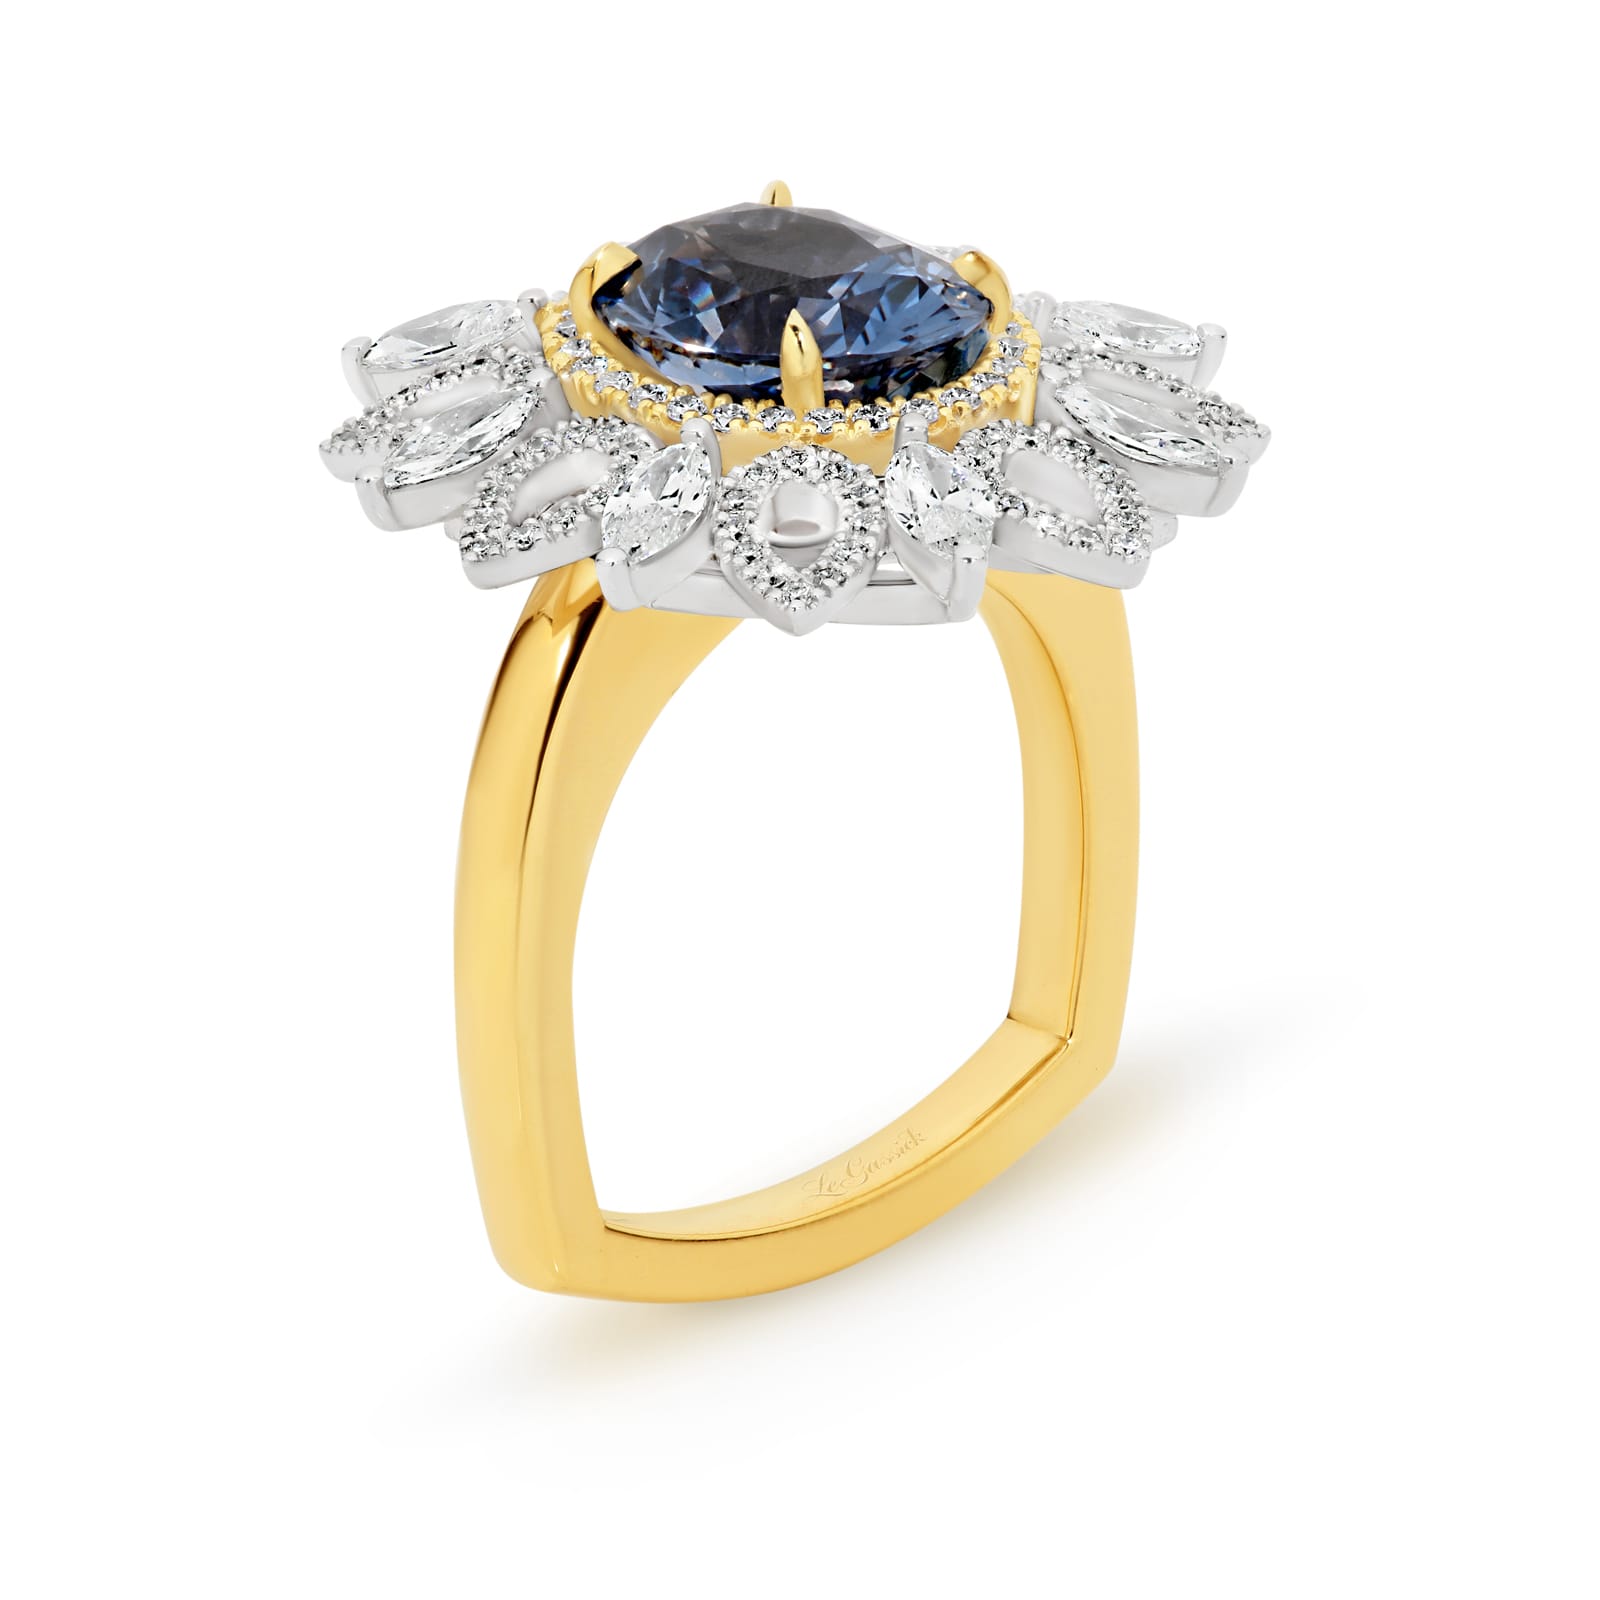 Aurora is a handcrafted 3.87ct Spinel and diamond ring from LeGassick Diamonds & Jewellery Gold Coast.